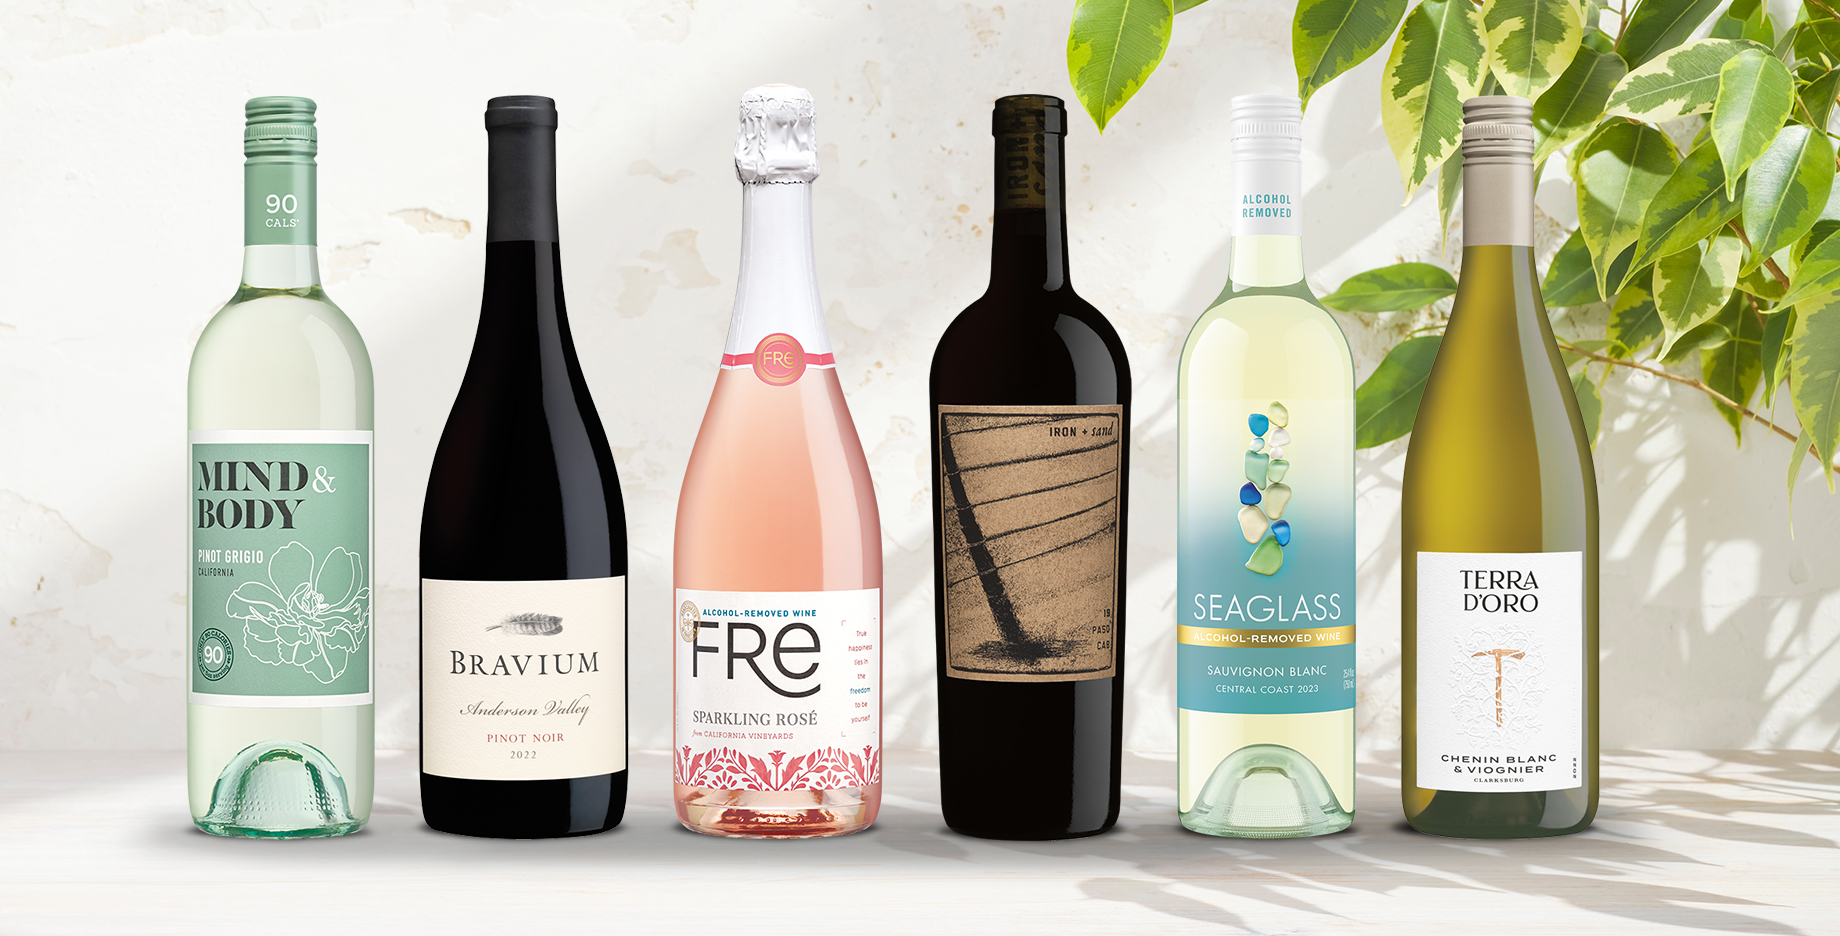 lineup of bottles of wine from One Stop Wine Shop's spring favorites selections on a white table with leaves from a green plant in the background